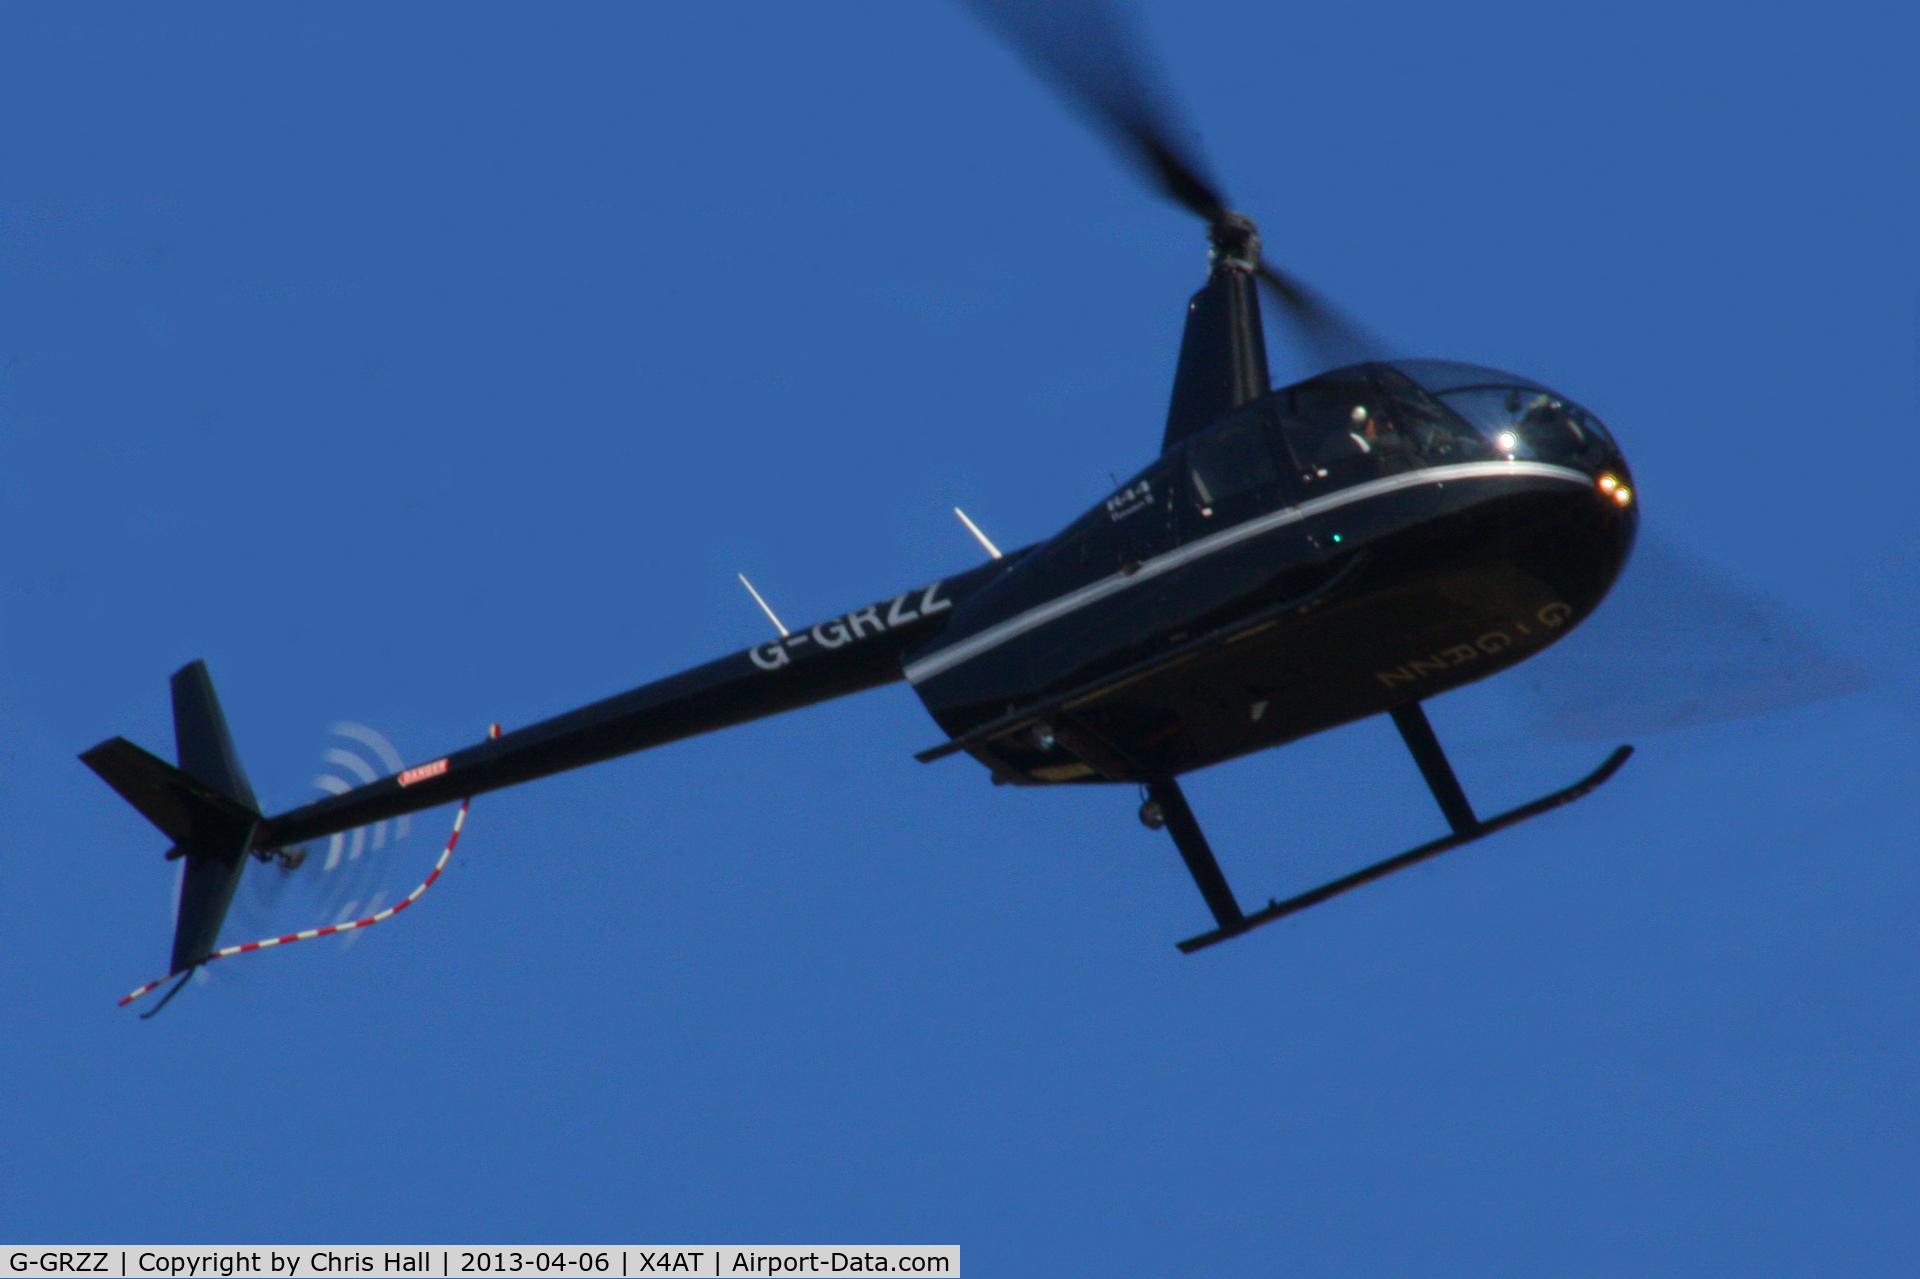 G-GRZZ, 2008 Robinson R44 Raven II C/N 12149, Ferrying racegoers into Aintree for the 2013 Grand National